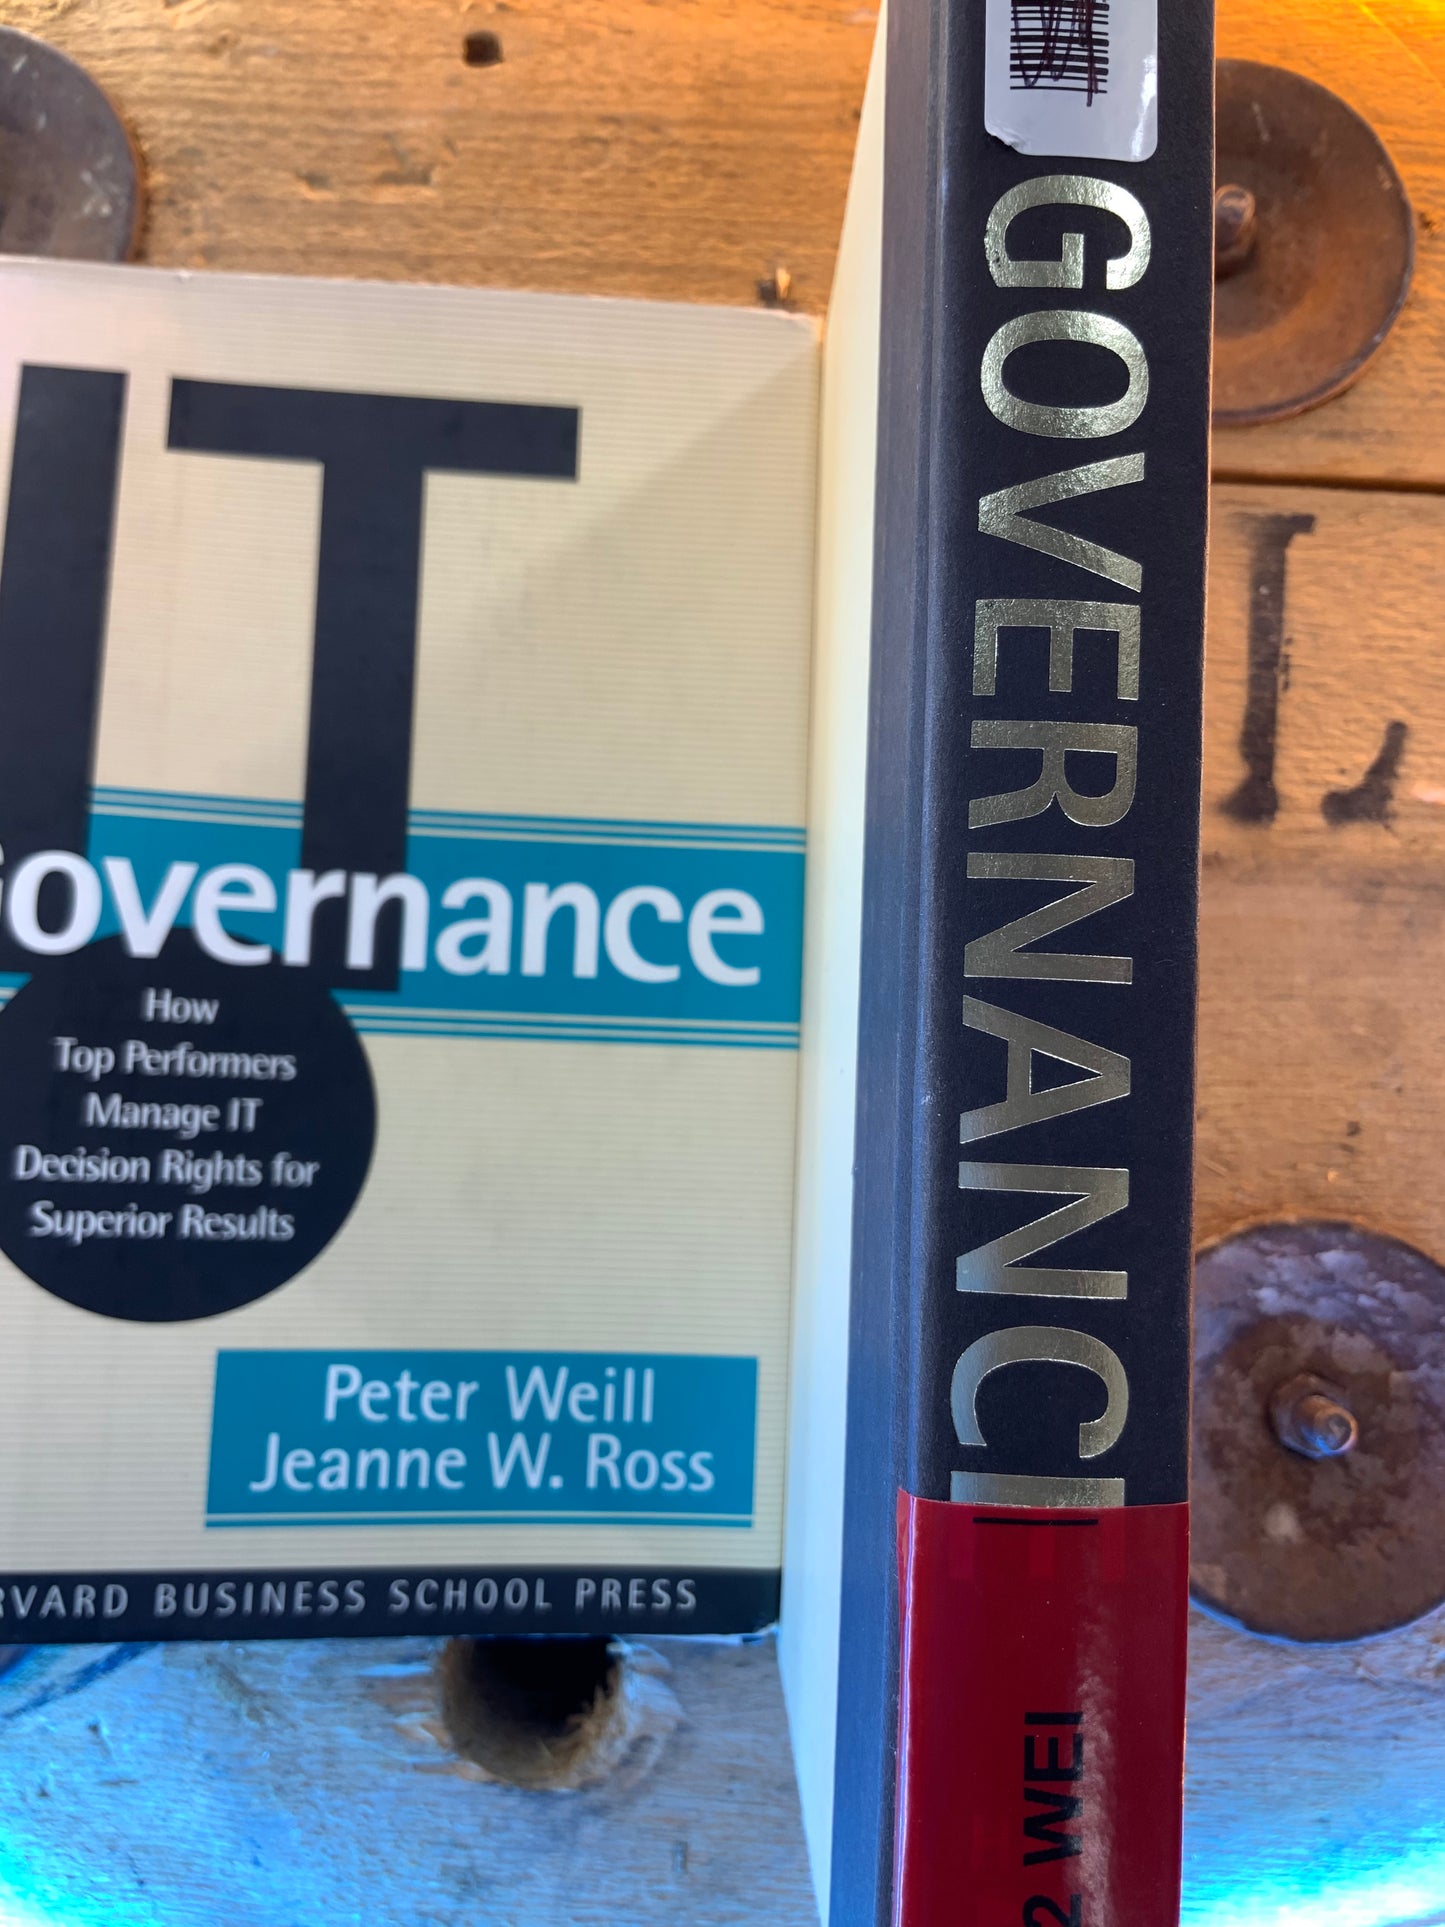 IT governance , Peter Weill and Jeane W. Rosse